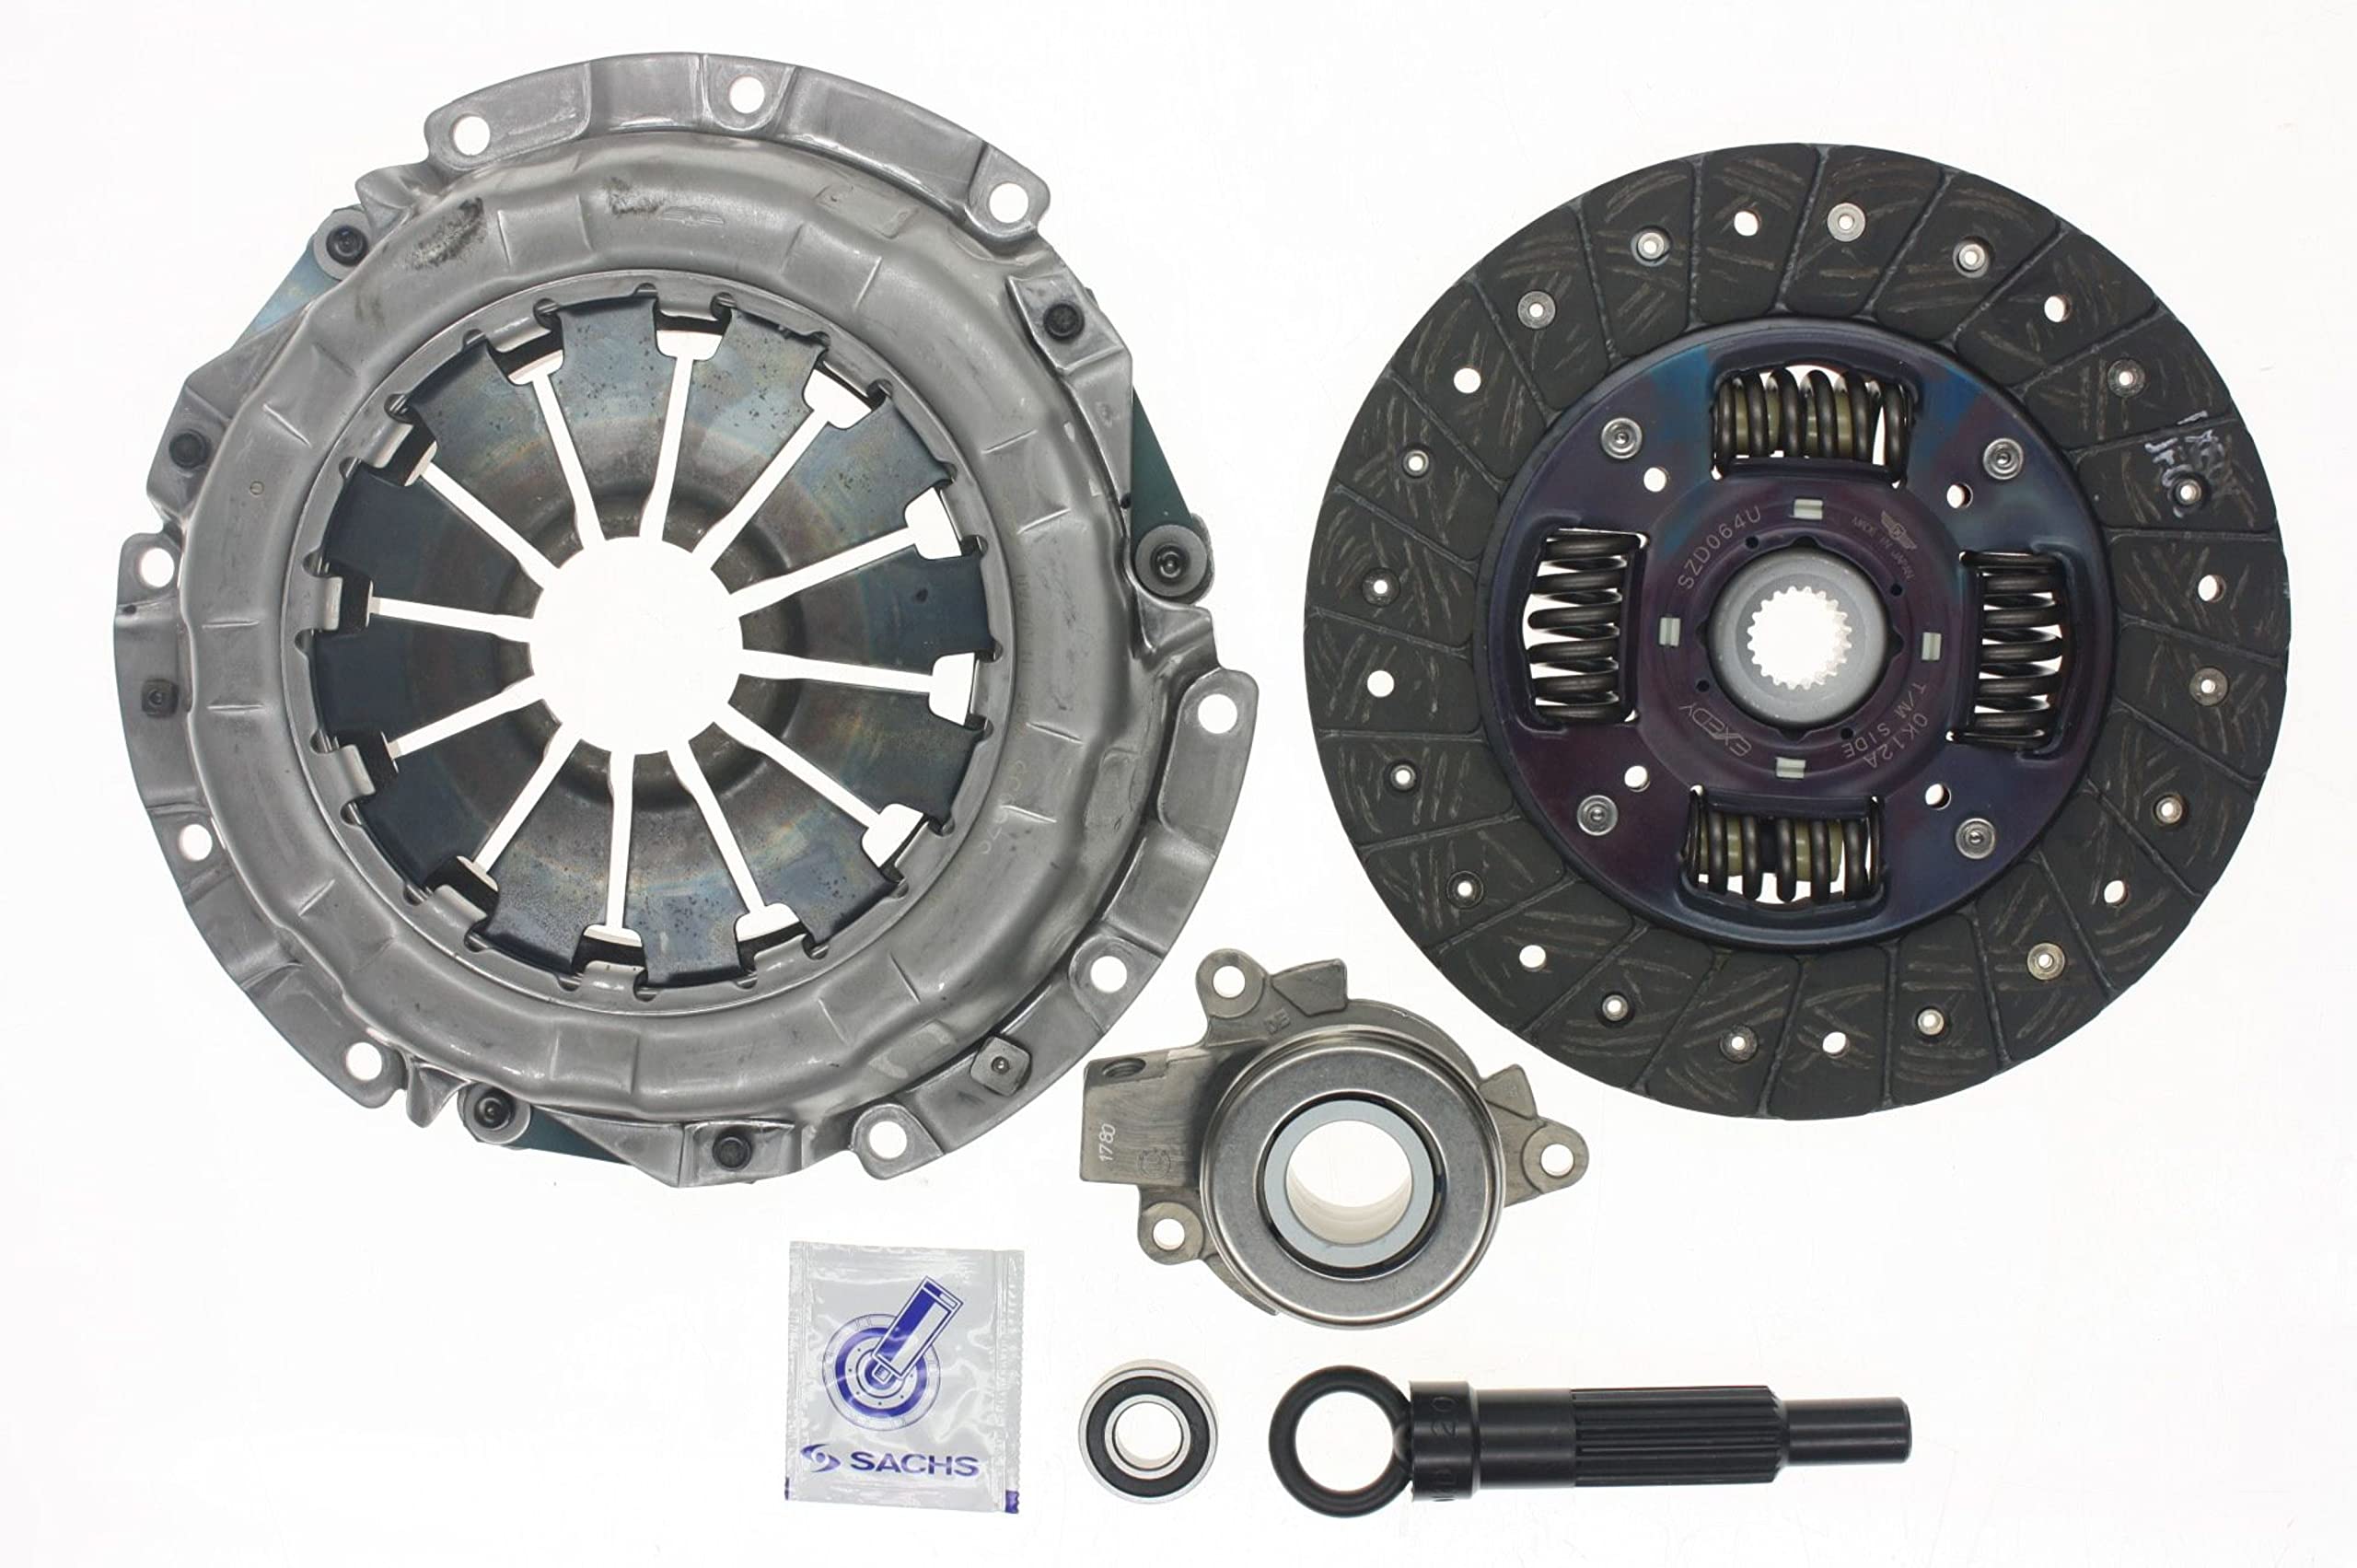 Affordable Suzuki SX4 Clutch Replacement: Cost-effective Solutions